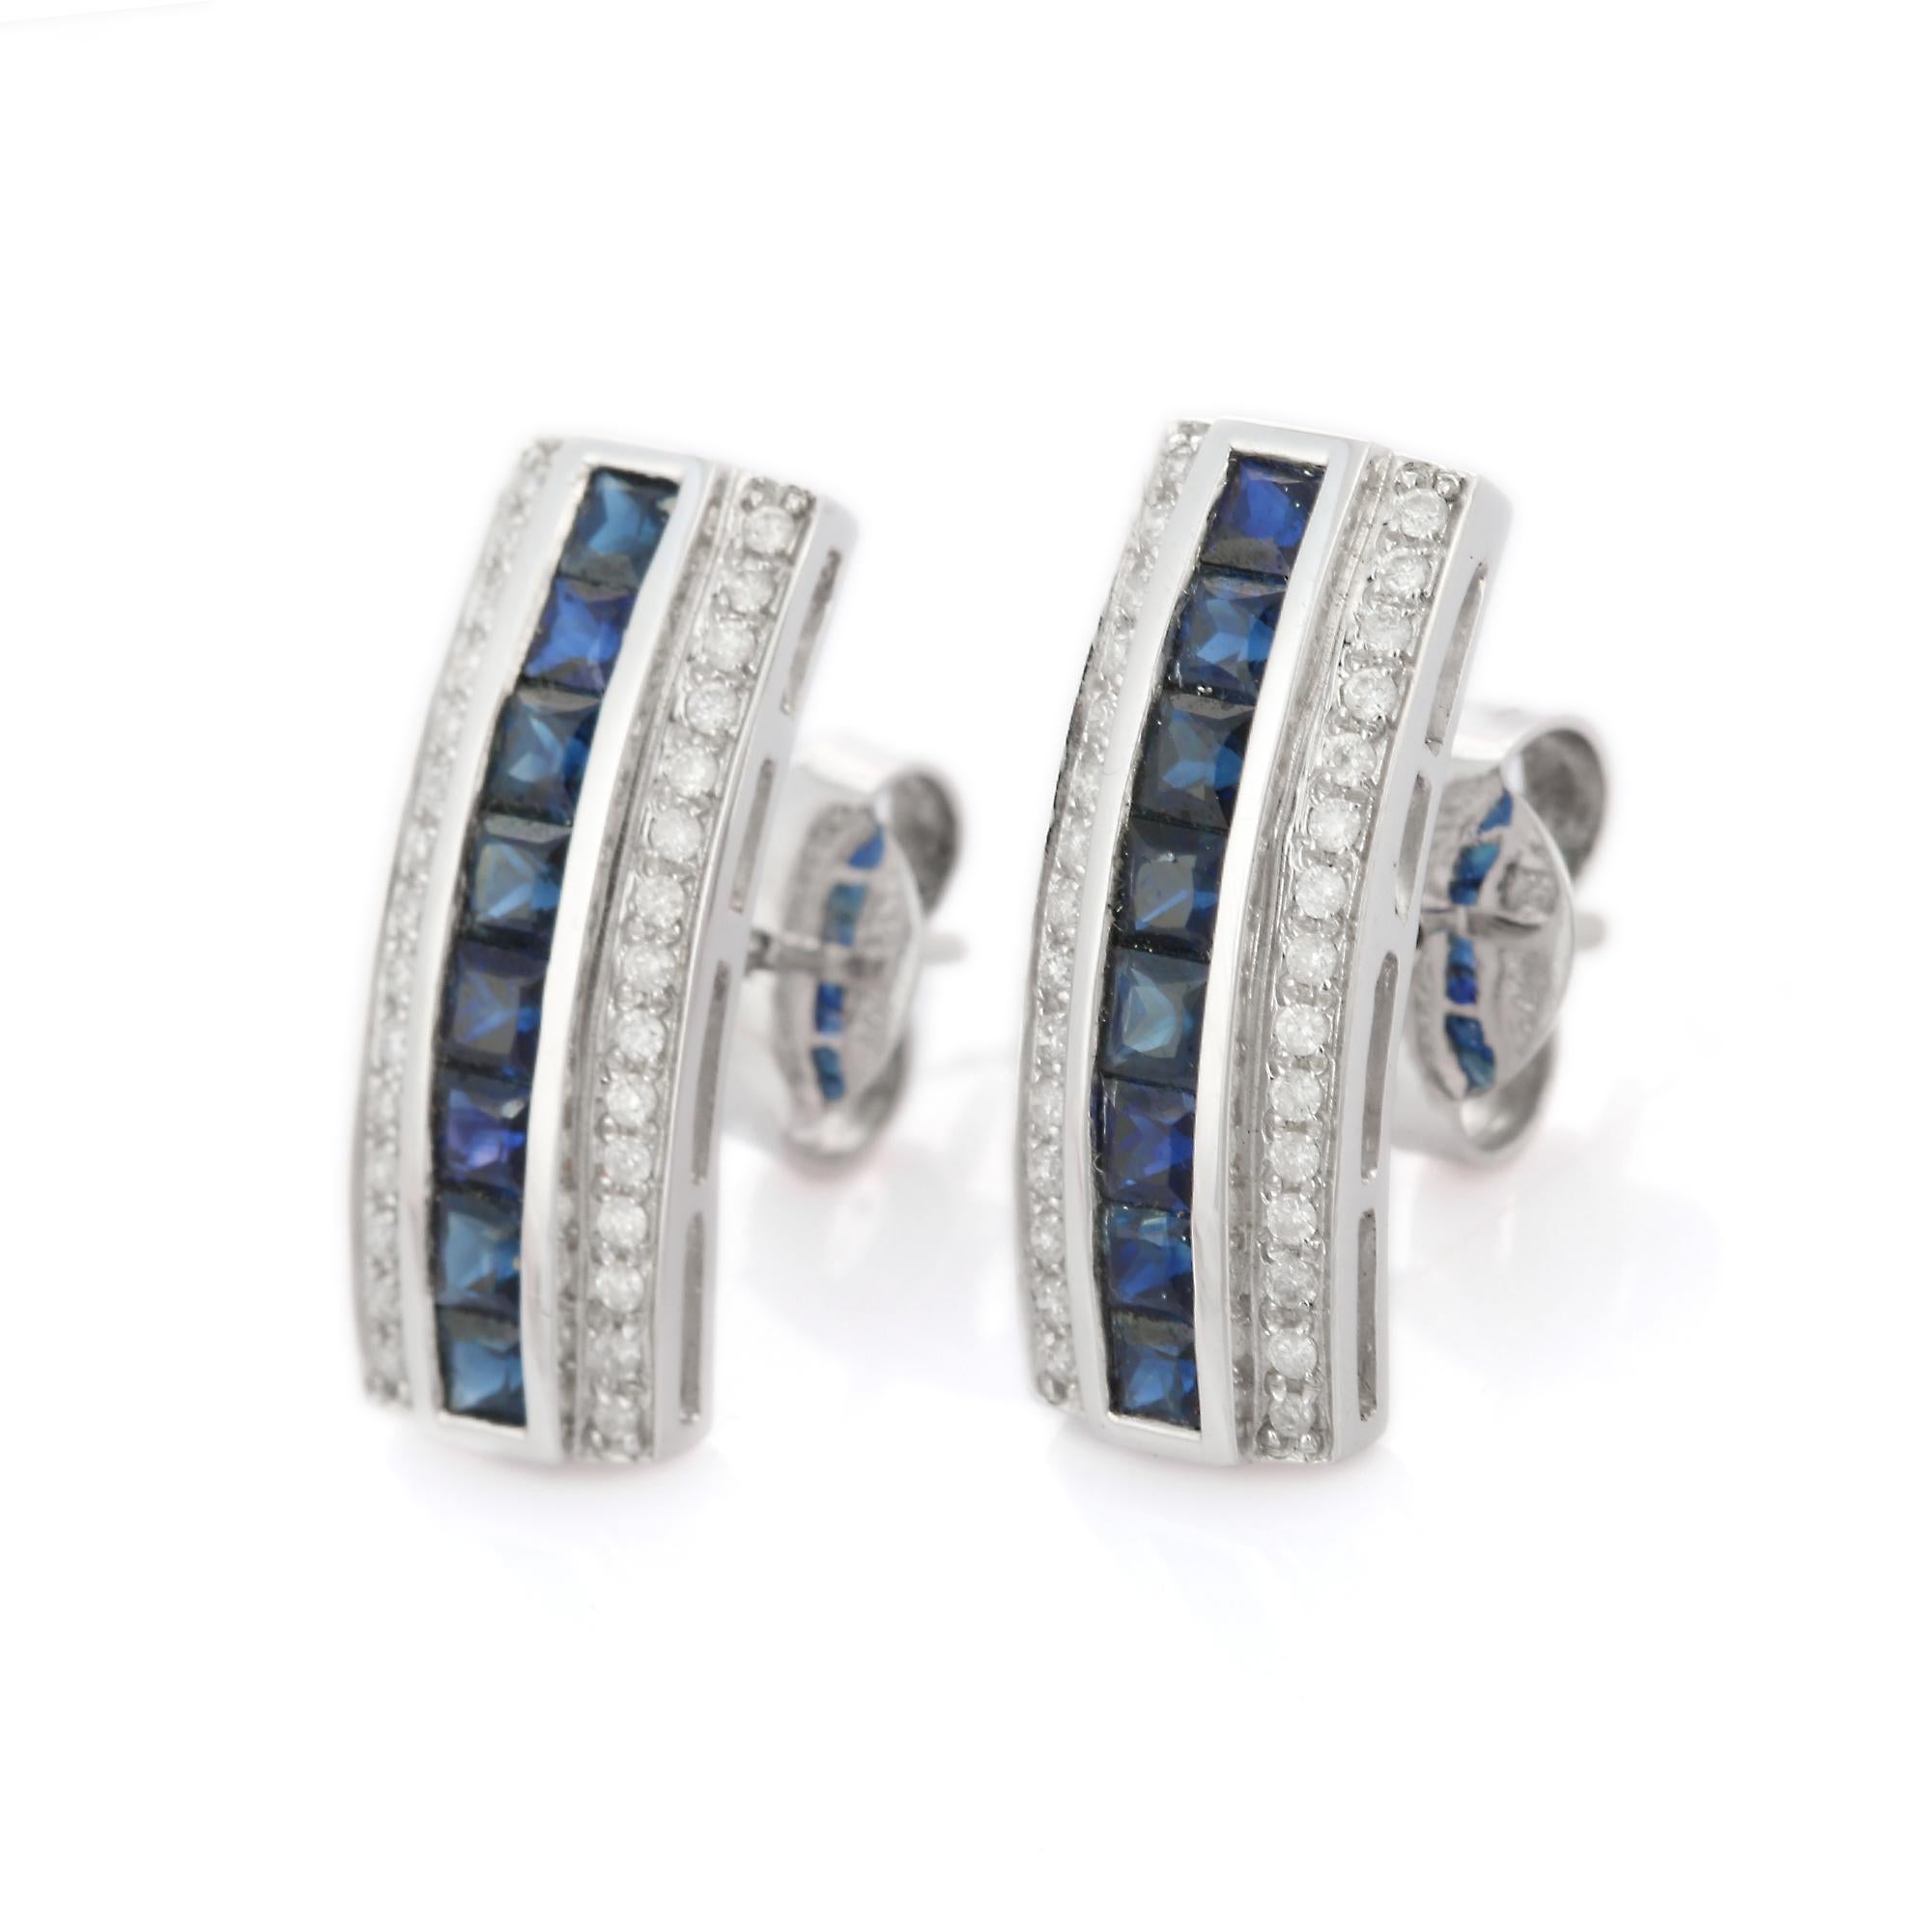 Studs create a subtle beauty while showcasing the colors of the natural precious gemstones and illuminating diamonds making a statement.

Baguette cut blue sapphire studs in 14K gold. Embrace your look with these stunning pair of earrings suitable